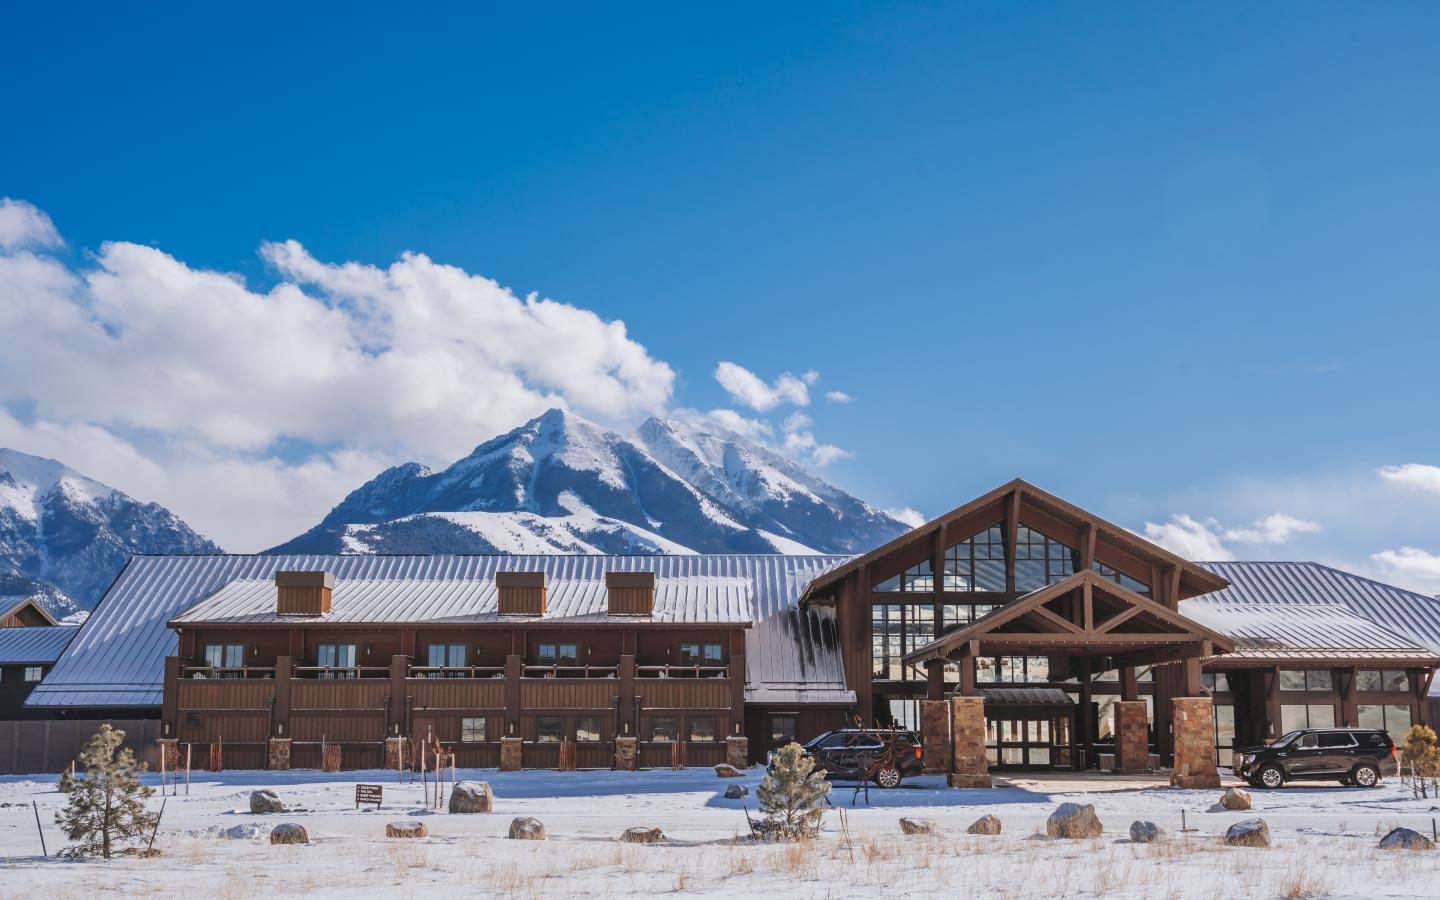 https://sagelodge.com/wp-content/uploads/2023/04/1440x900-exterior-Sage-Lodge-with-snowy-mountain-views-Montana-Luxury-Hotel-near-Yellowstone-National-Park.jpg